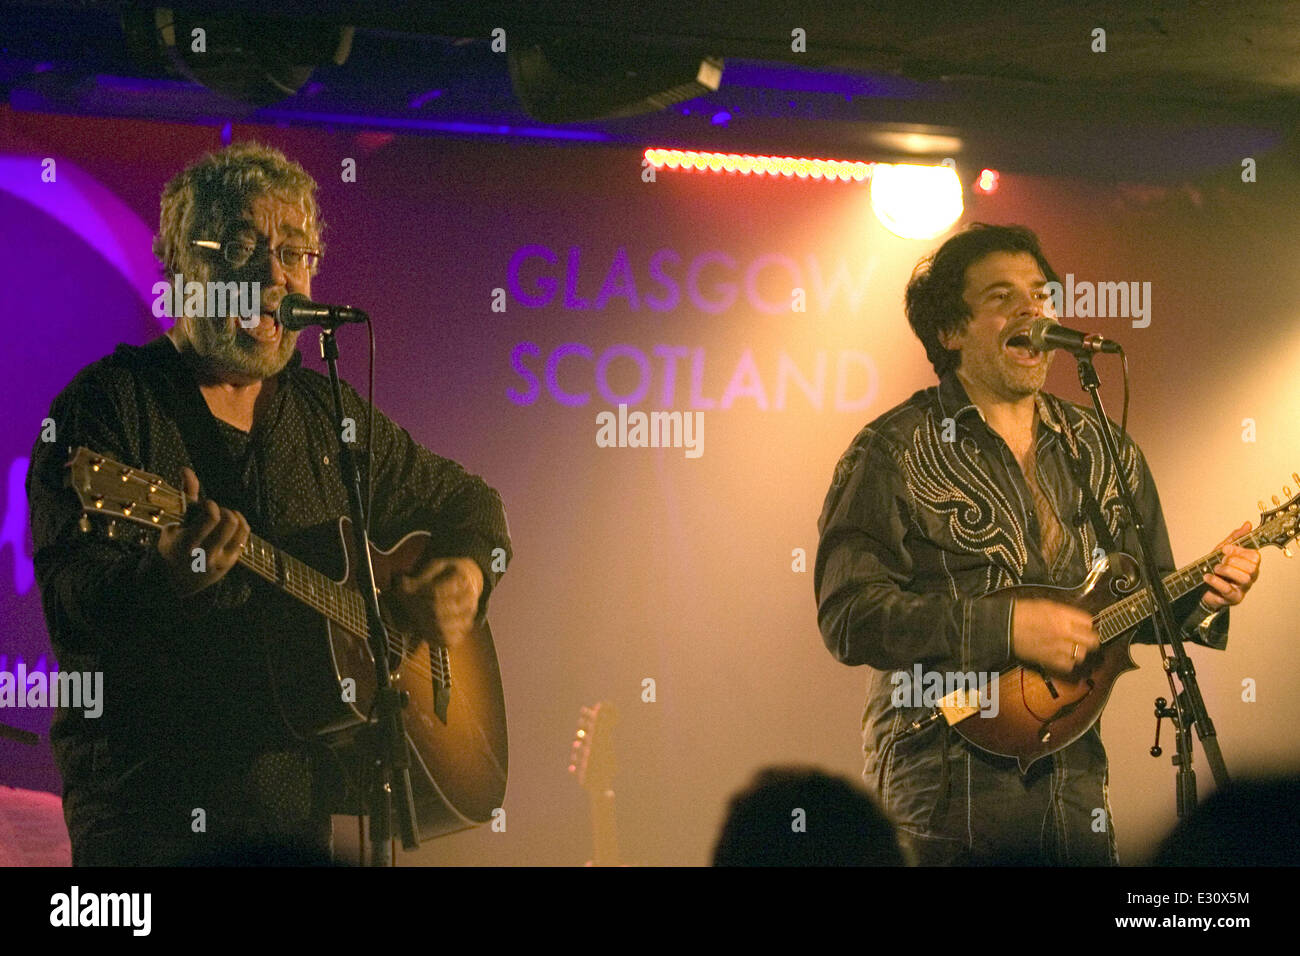 World Party ends their UK tour with a performance at the Oran Mor in Glasgow  Featuring: Karl Wallinger,David Duffy Where: Glasg Stock Photo